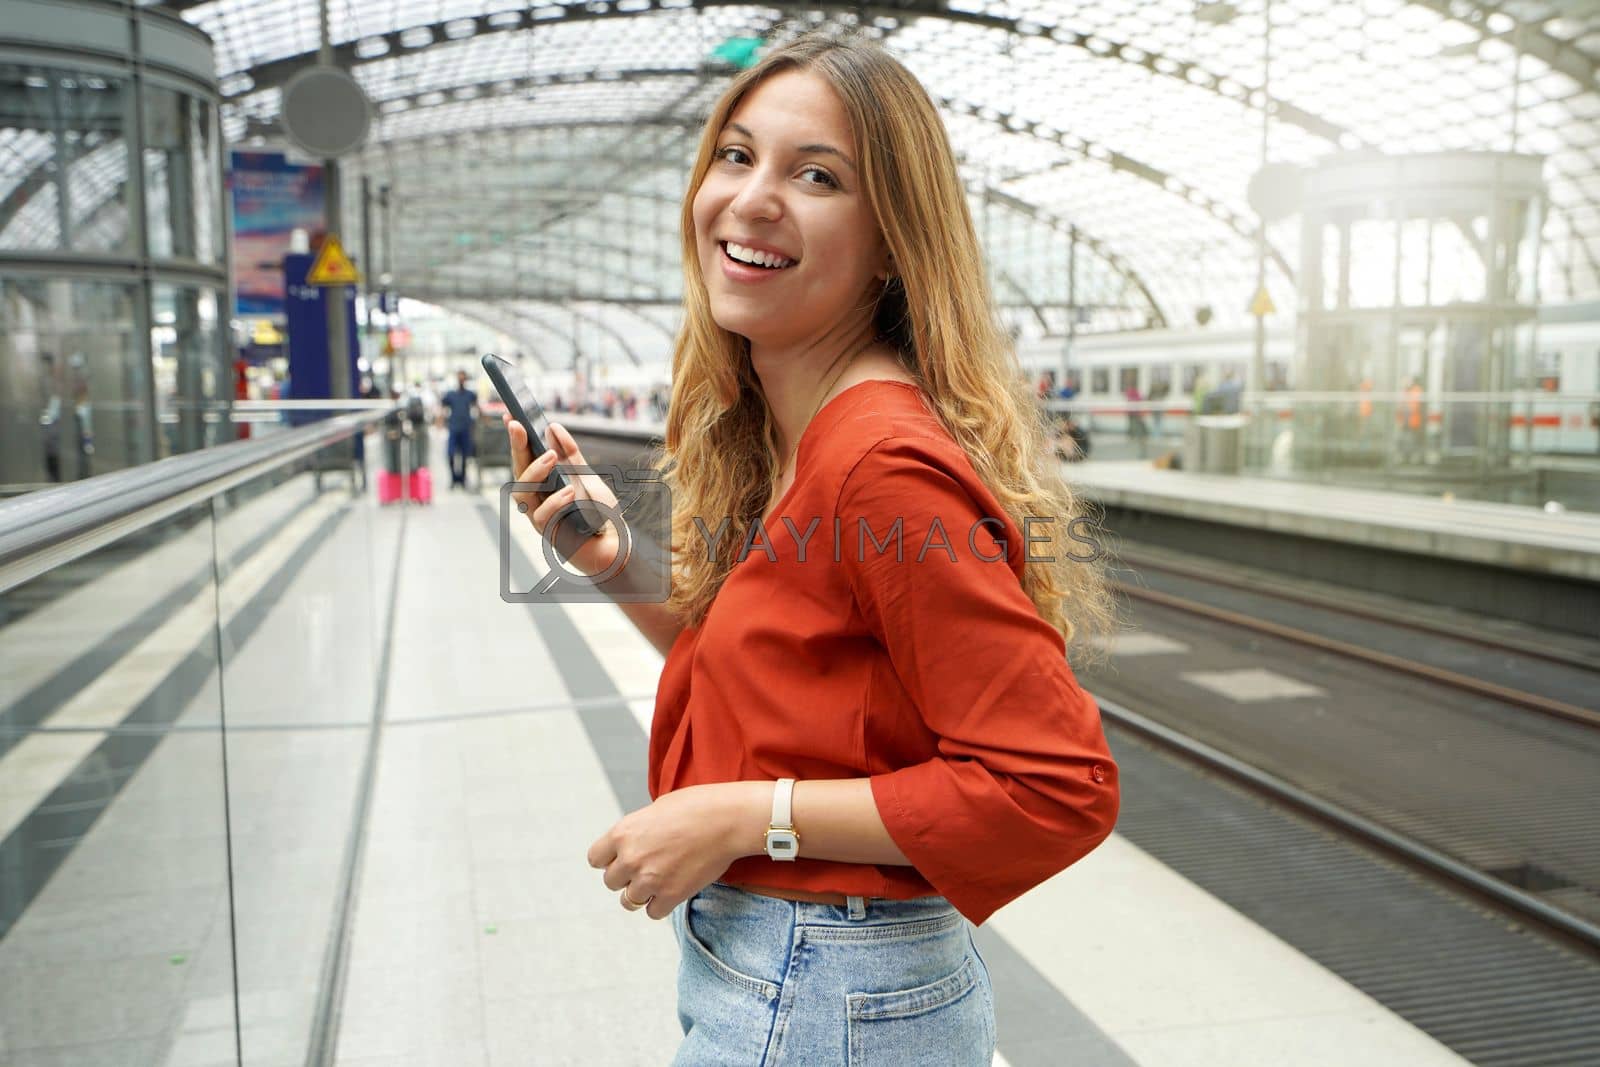 Royalty free image of Attractive hispanic girl in train station looking at camera holding phone by sergio_monti